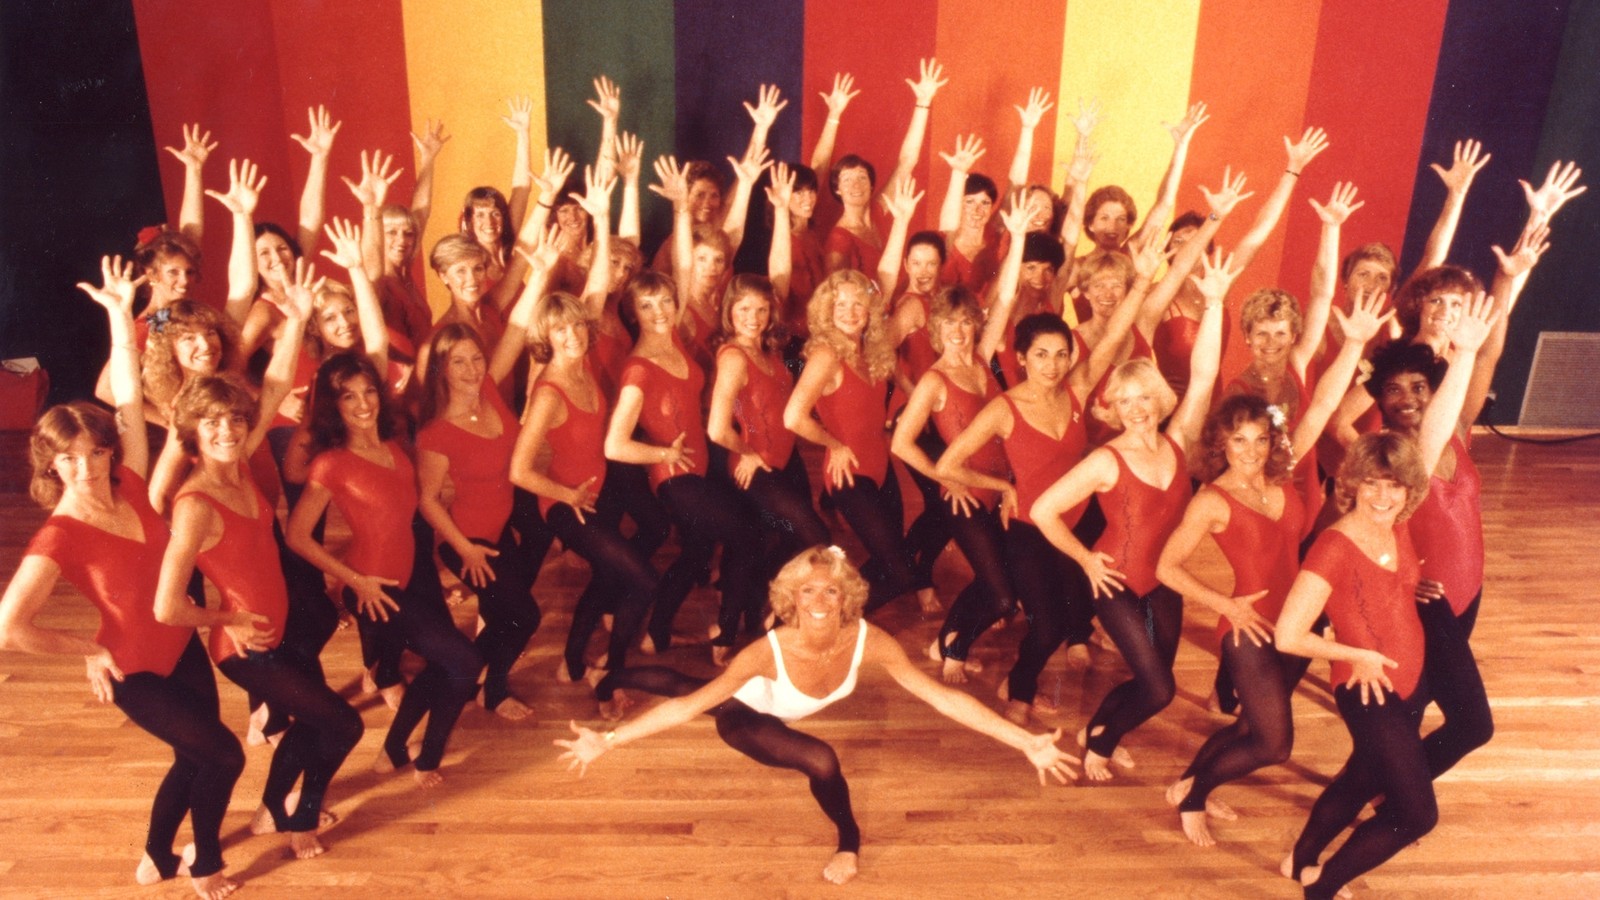 How Jazzercise Changed Fitness Culture for Women - The Atlantic